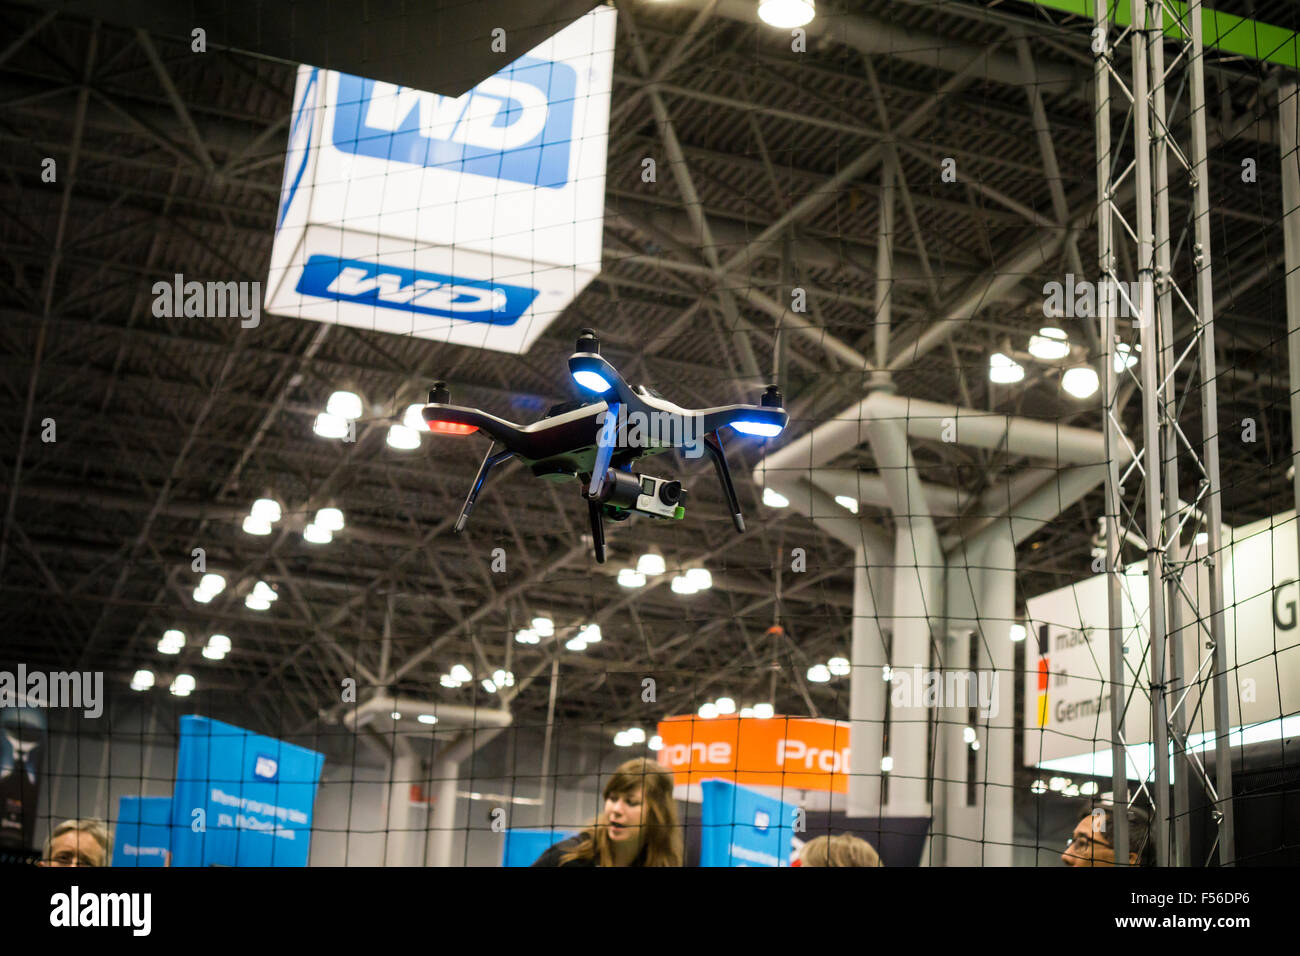 A commercial drone is demonstrated at a trade show in New York on Friday, October 23, 2015.  The US Dept. of Transportation has convened a task force to recommend parameters for drone registration, with a time frame that the regulations will be ready for Christmas. (© Richard B. Levine) Stock Photo